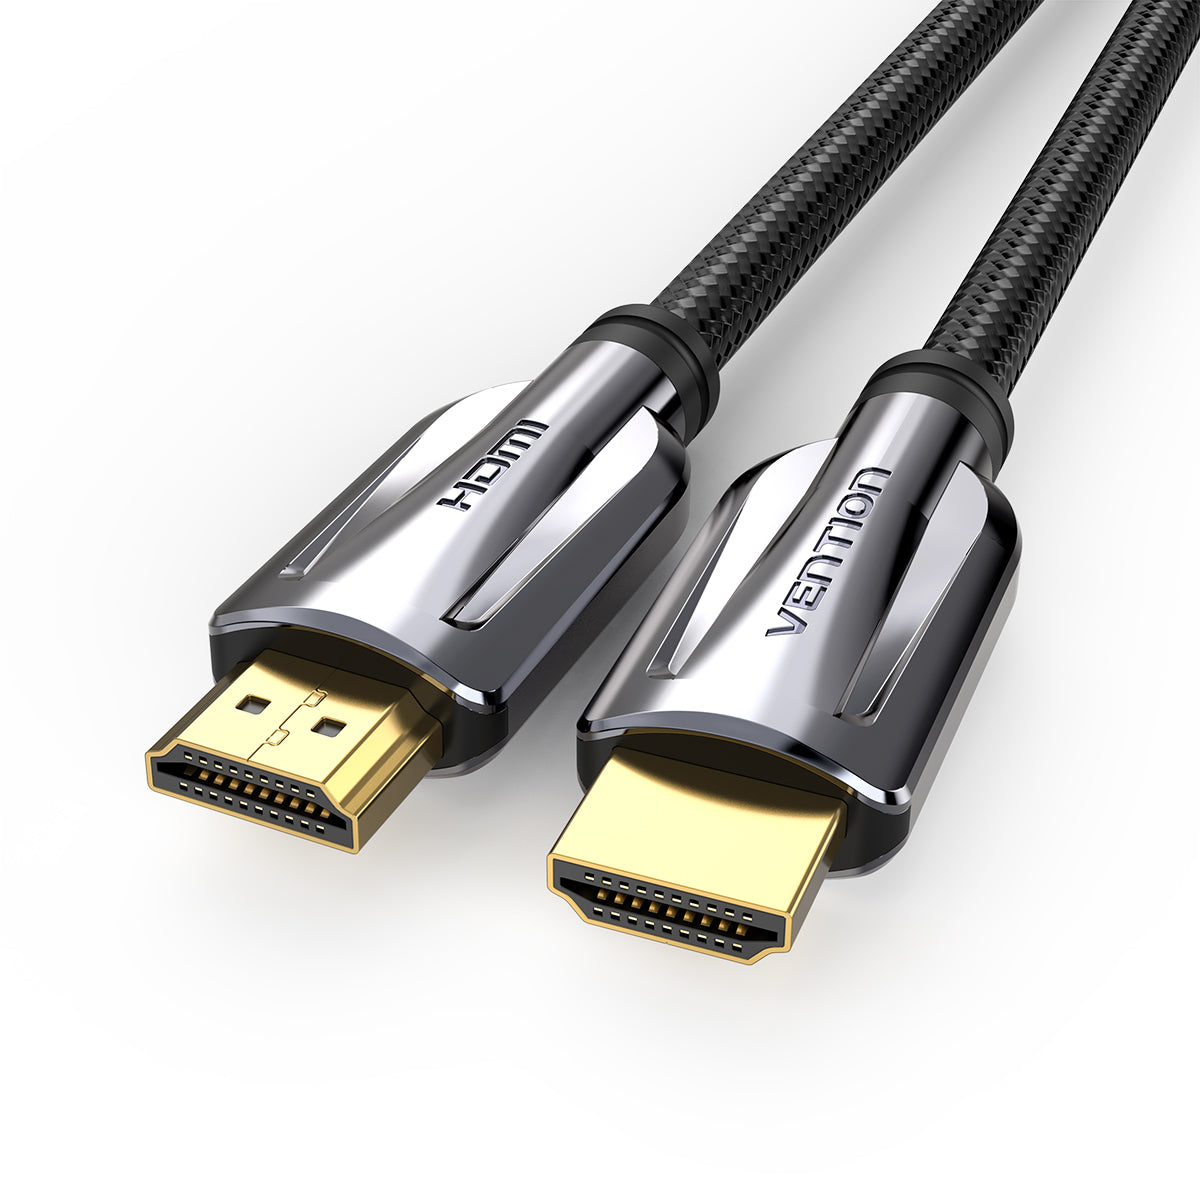 Things to Consider Before Buying the HDMI 1.4 Cable